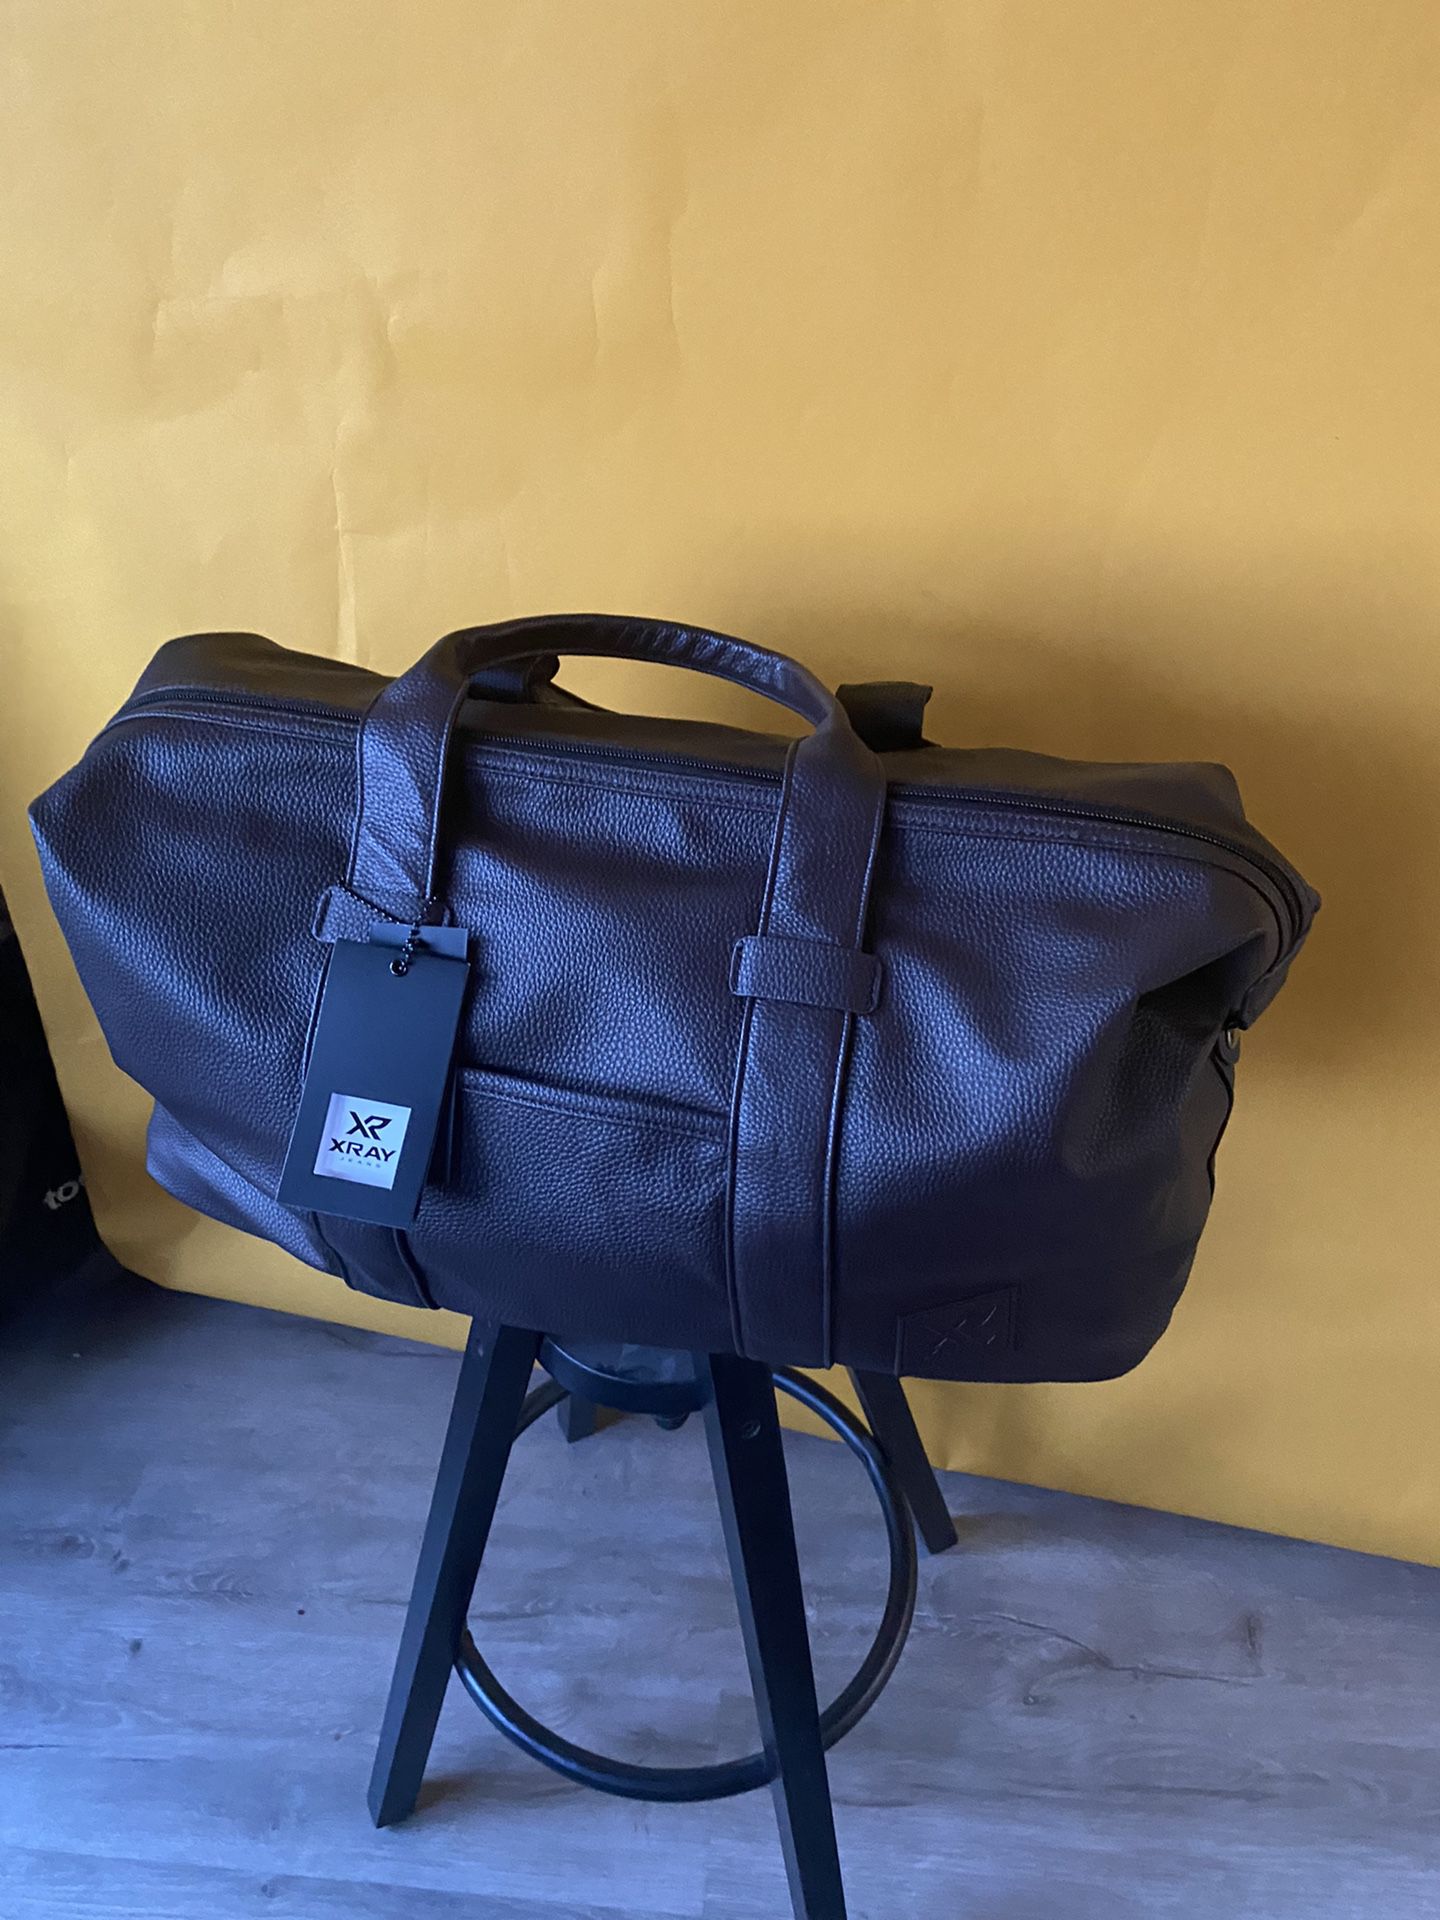 X RAY DUFFLE BAG ONE SIZE 